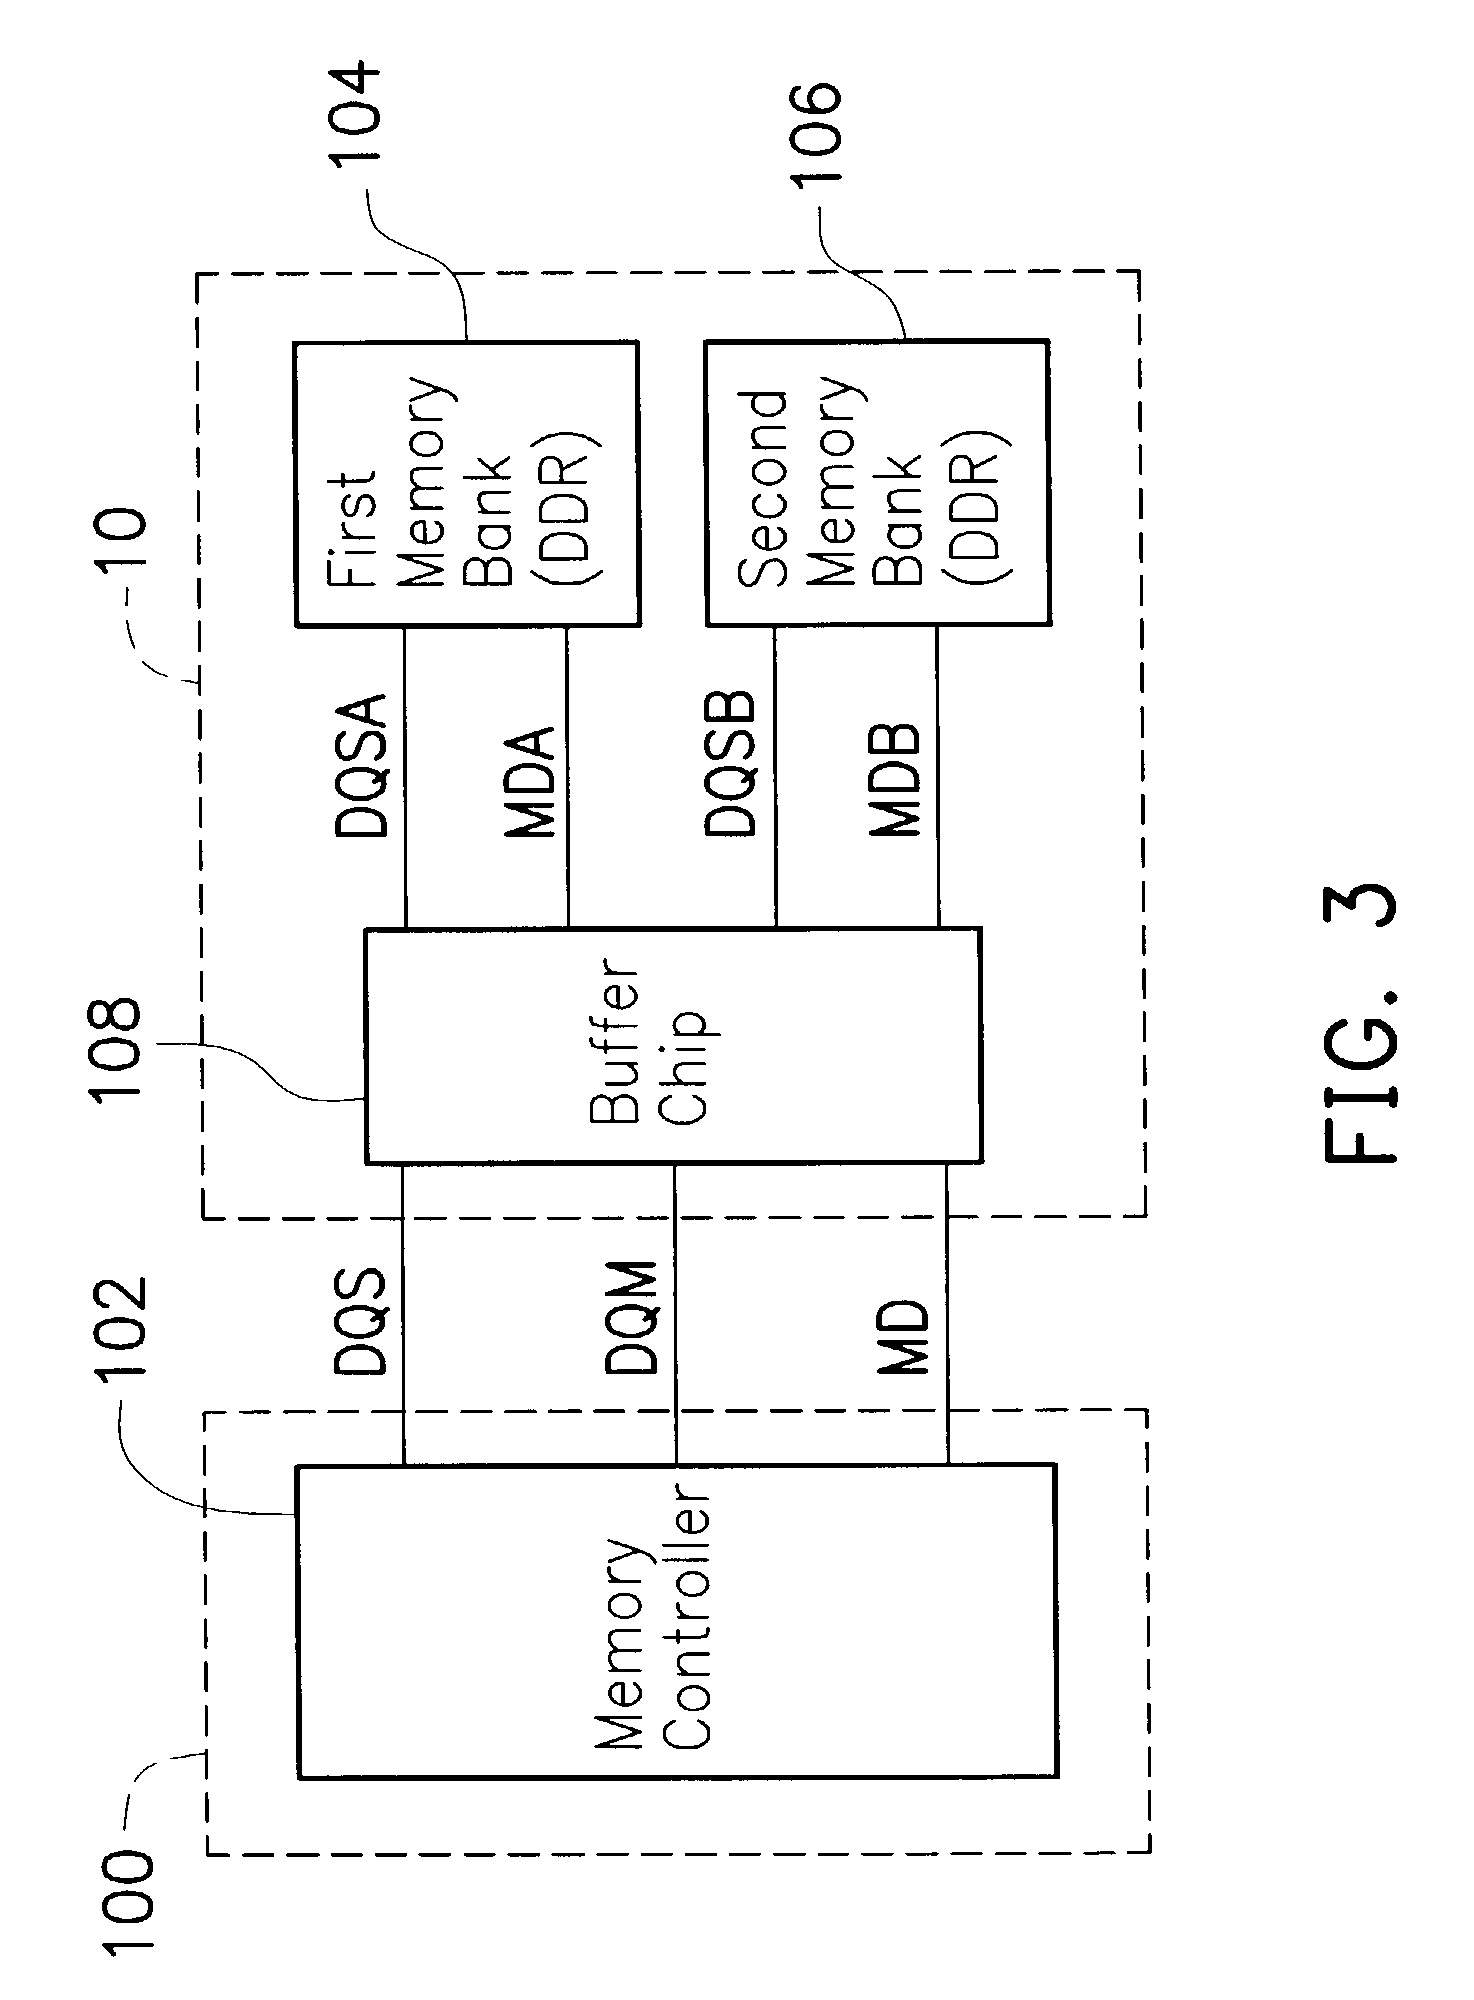 Memory controller for supporting a plurality of different memory accesse modes